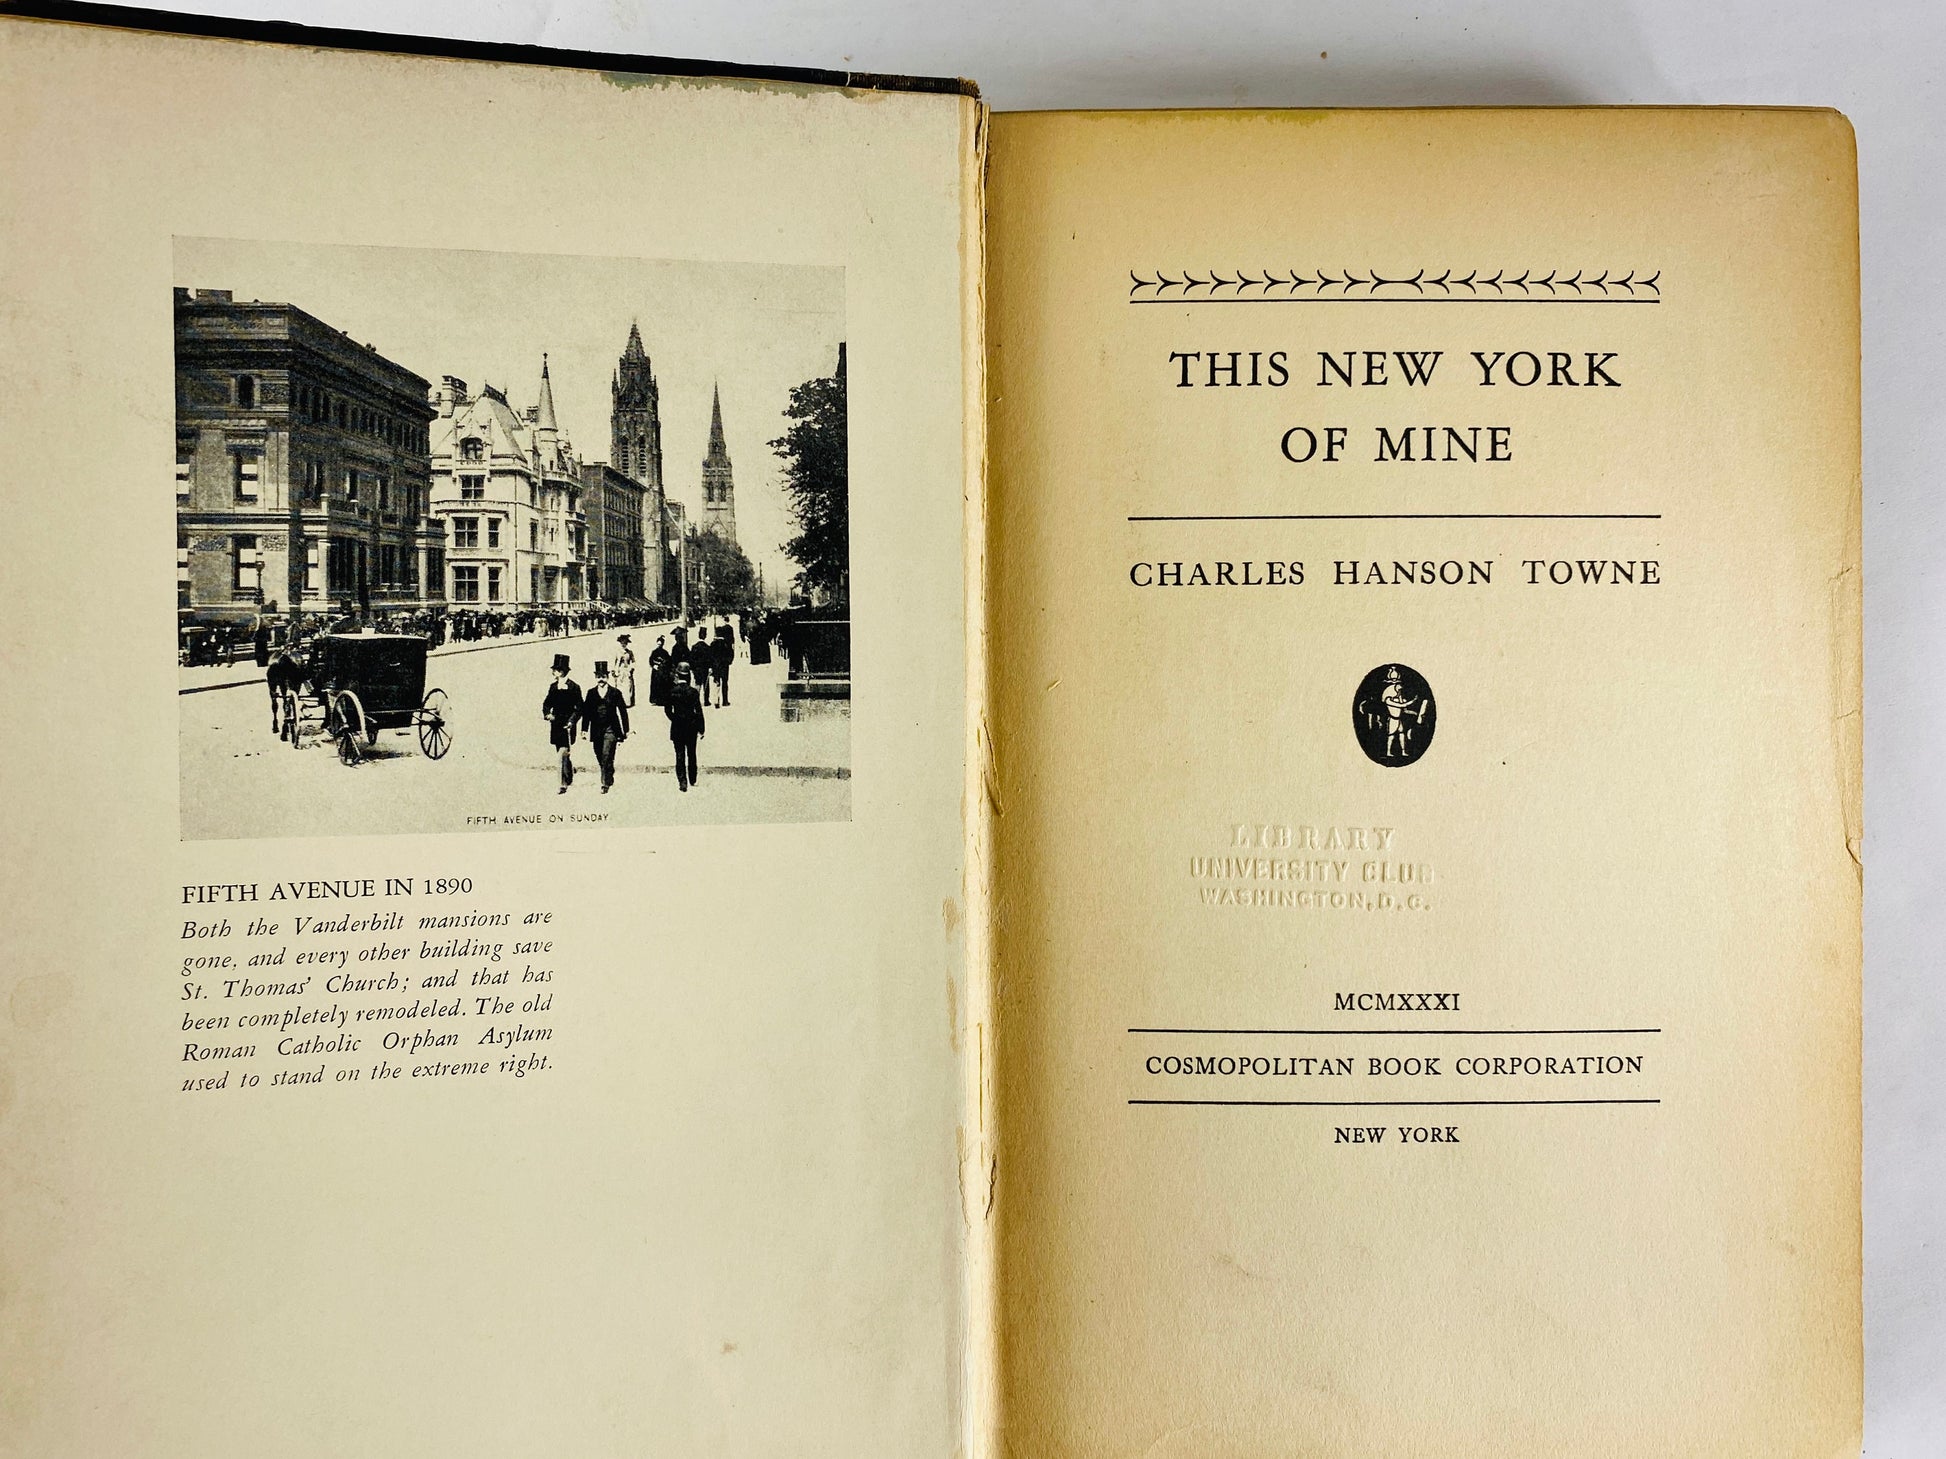 This New York of Mine FIRST EDITION 1931 antique book by Charles Hanson Towne about the adventures of living in the City. NYC Vintage